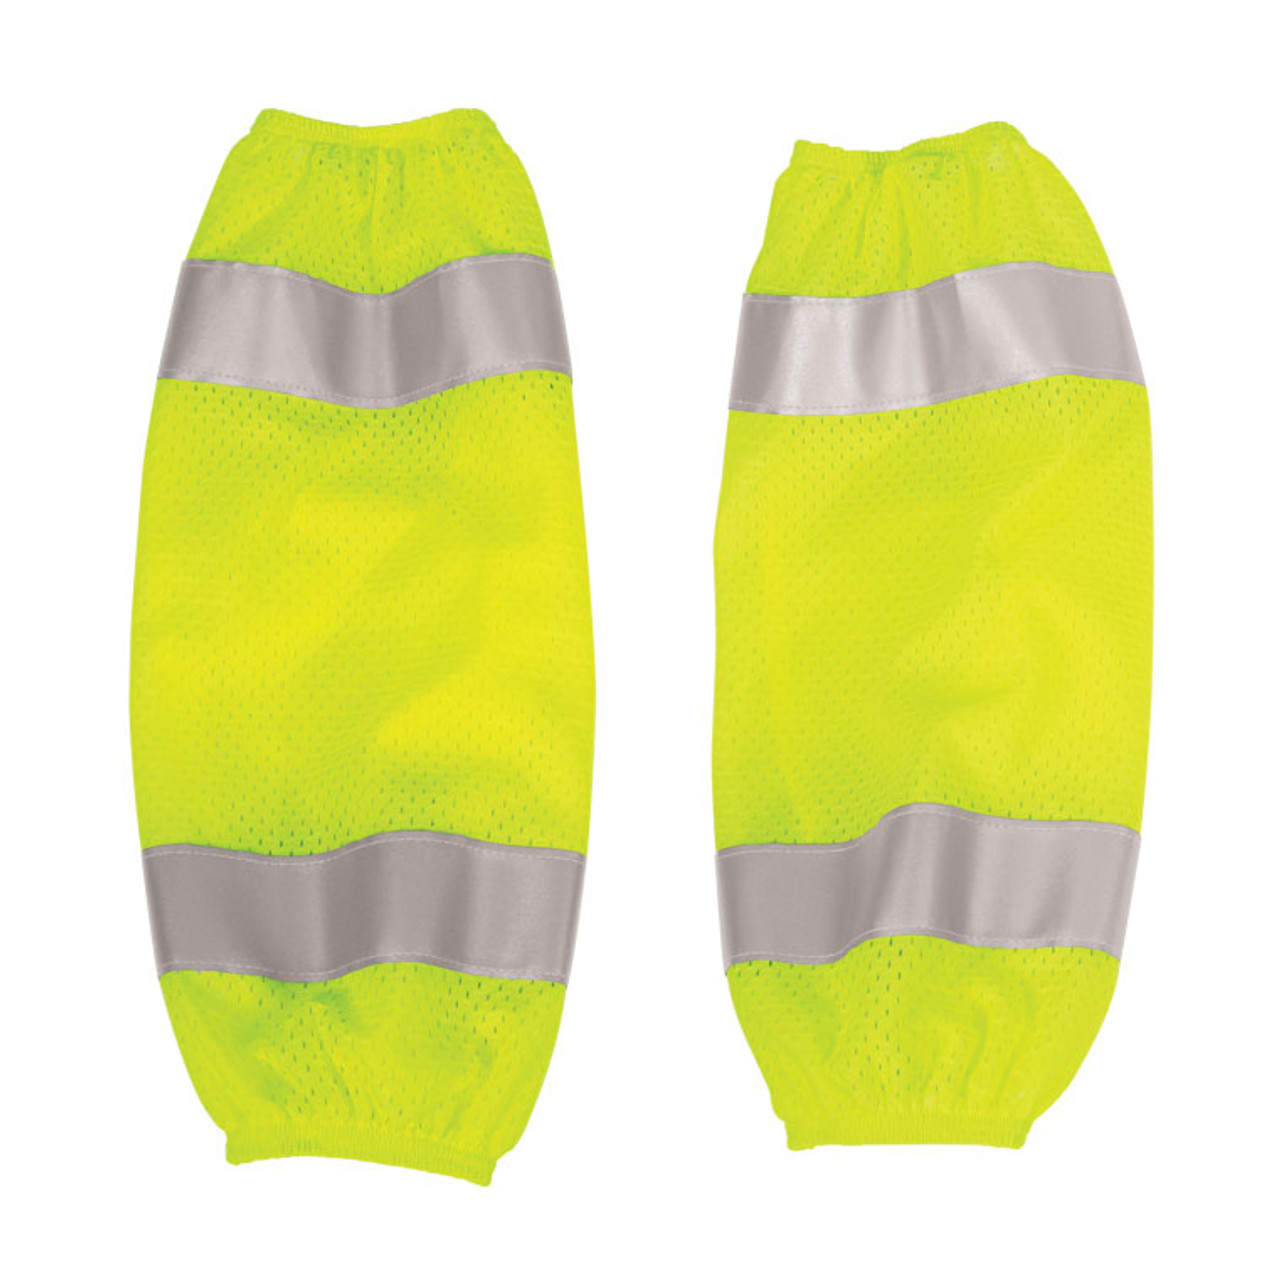 ML Kishigo 3930 Lime Mesh Gaiters - Industrial Safety Products